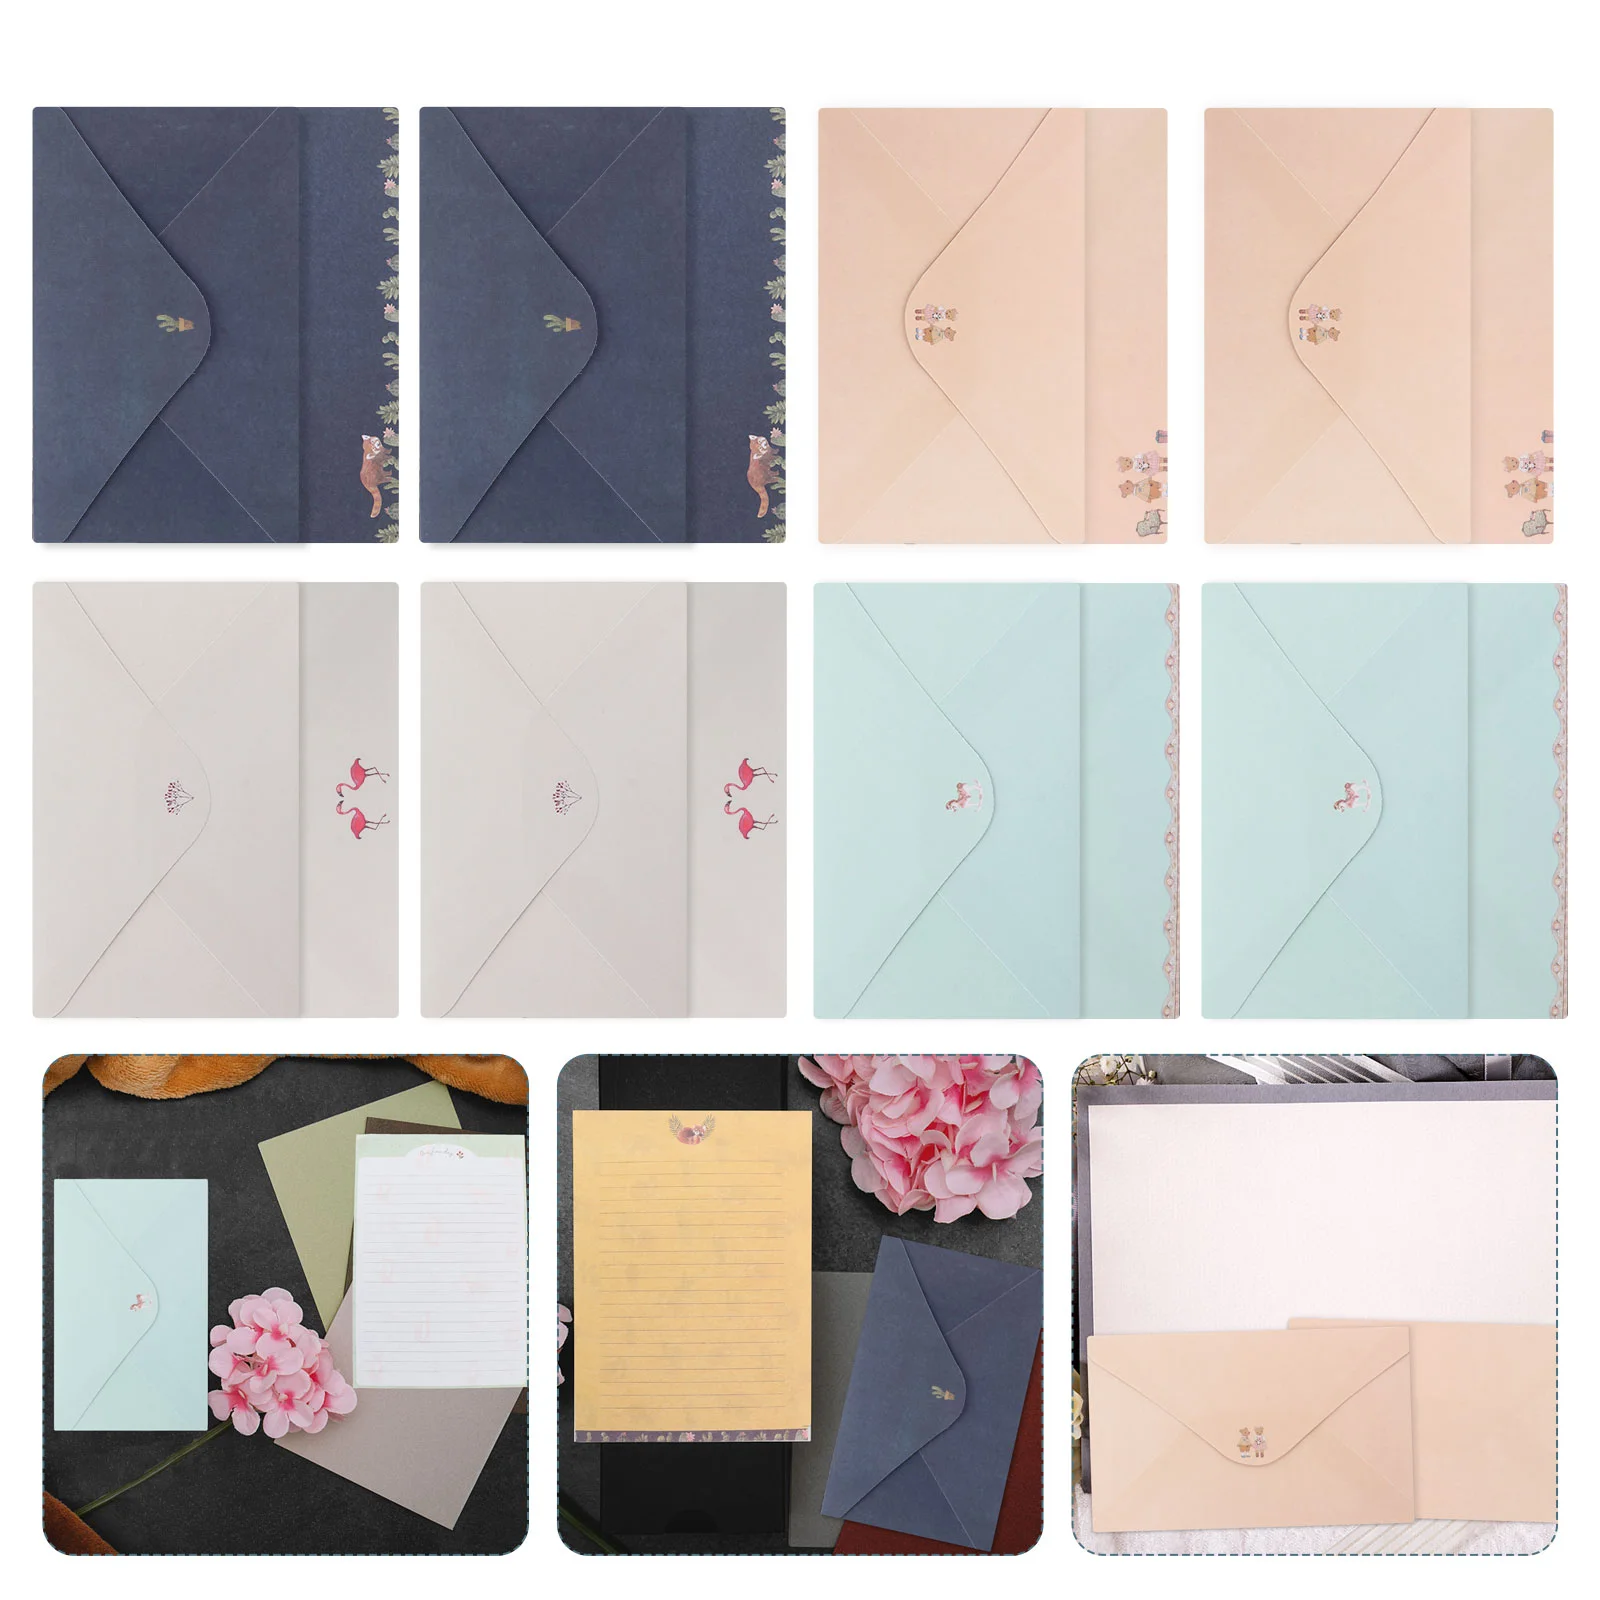 54 Pcs Envelope Wedding Wrapping Paper Letter Stationery Writing with Envelopes Western Style invitation flower desig letter paper craft paper kraft paper with rope retro vintage letter pad writing paper envelope